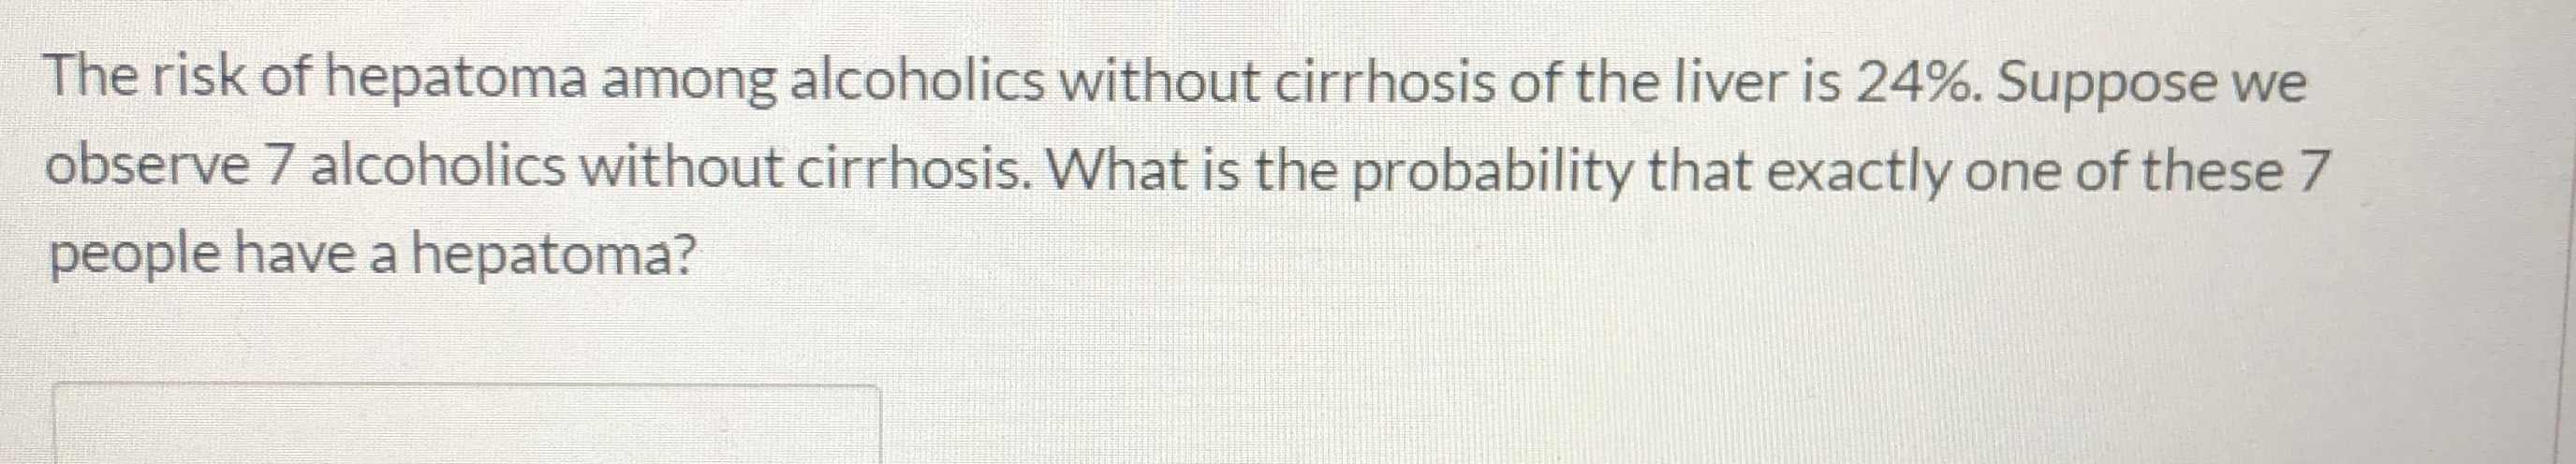 The risk of hepatoma among alcoholics without cirrhosis of the liver is 24%. Suppose we
observe 7 alcoholics without cirrhosis. What is the probability that exactly one of these 7
people have a hepatoma?
